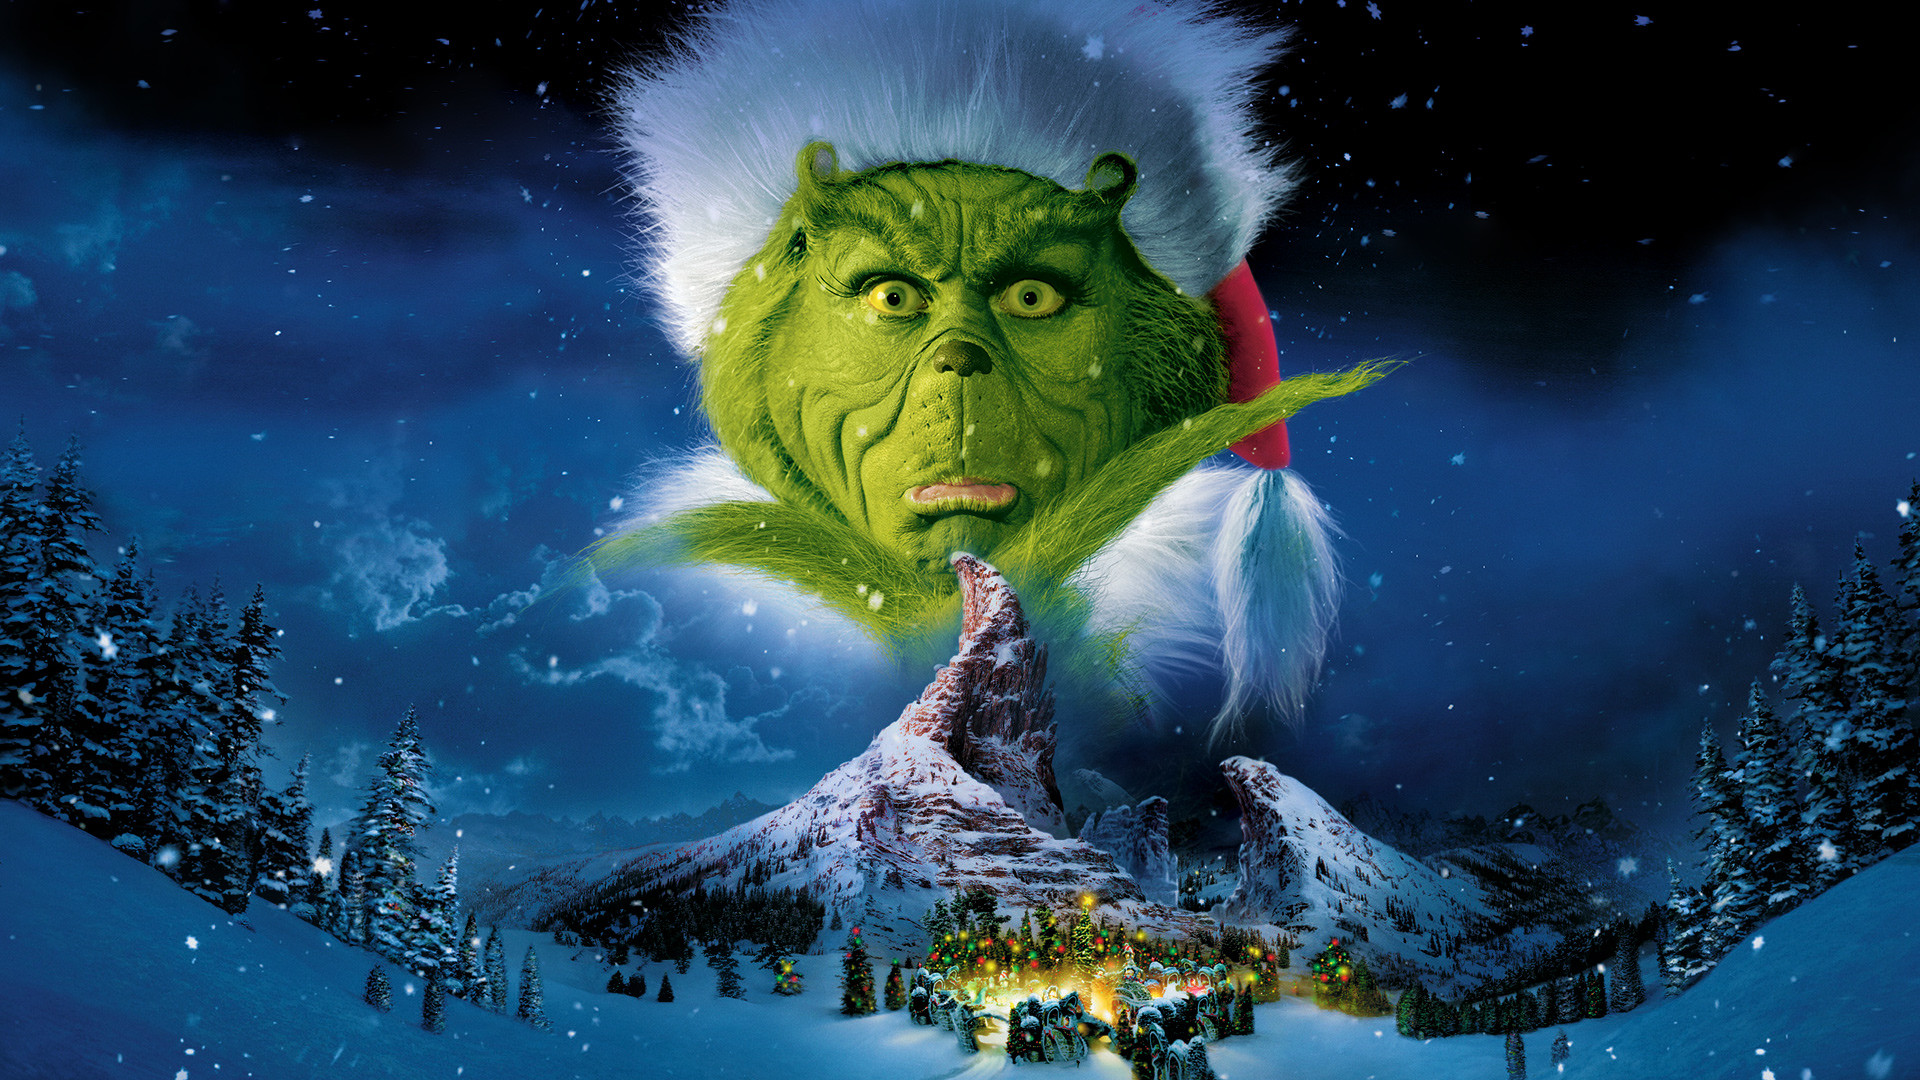 The Grinch 02